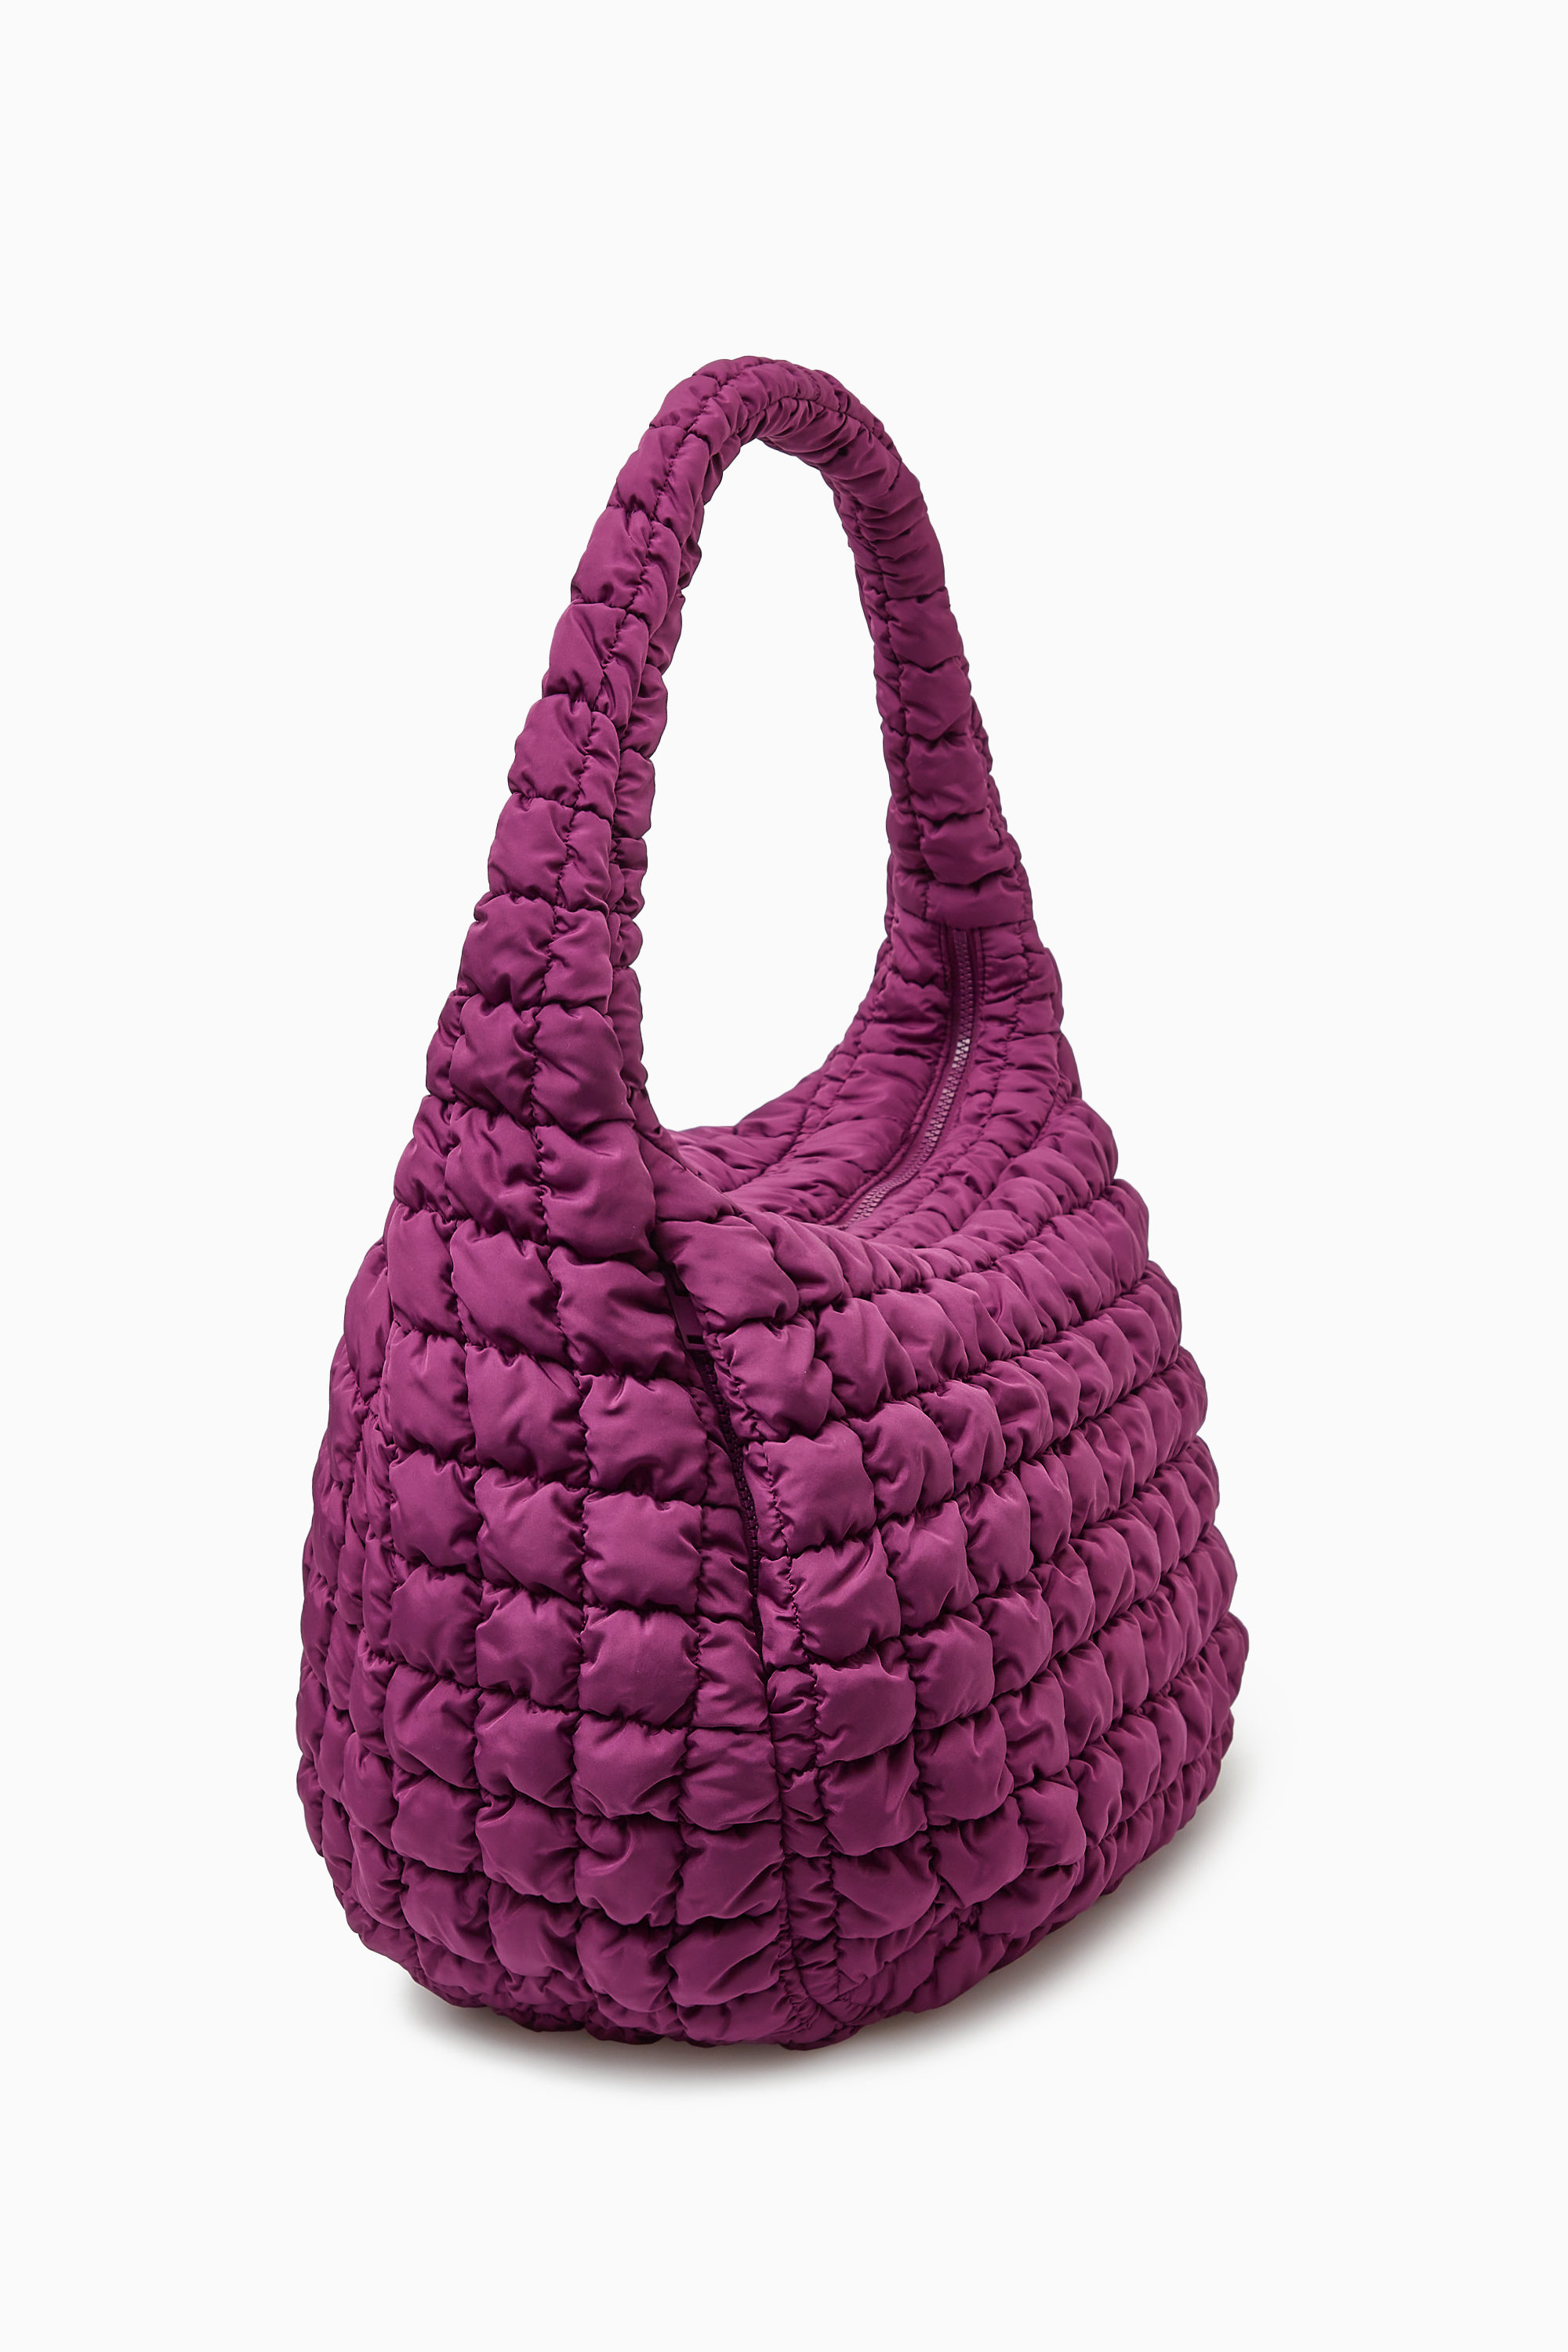 PAUSE Highlights: COS Quilted Oversized Shoulder Bag – PAUSE